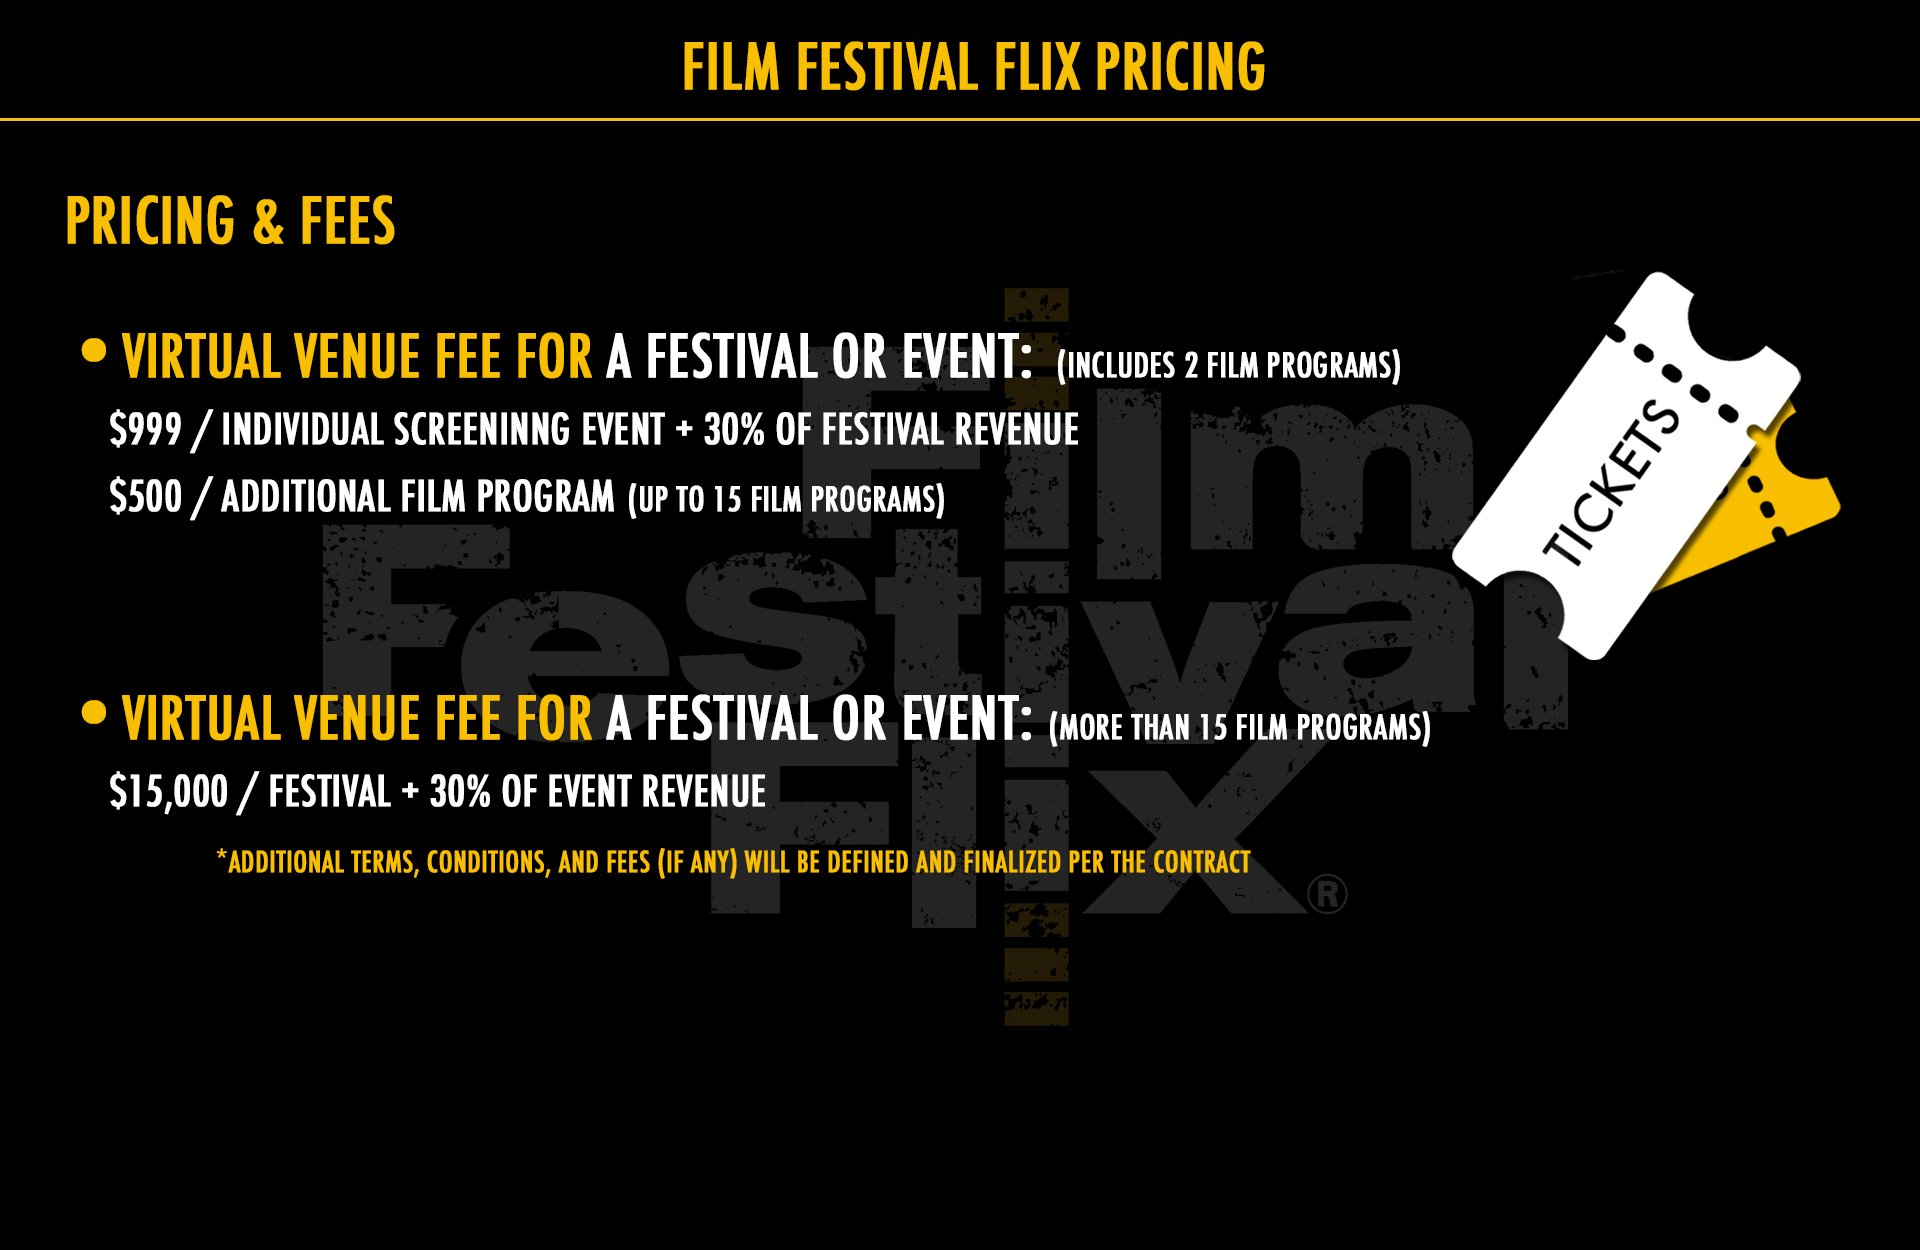 Launch your own secure and private channel on Film Festival Flix offering VIP access to exclusive content with total control over your content, audience, sponsors, and advertisers. Plans start as low as $999.